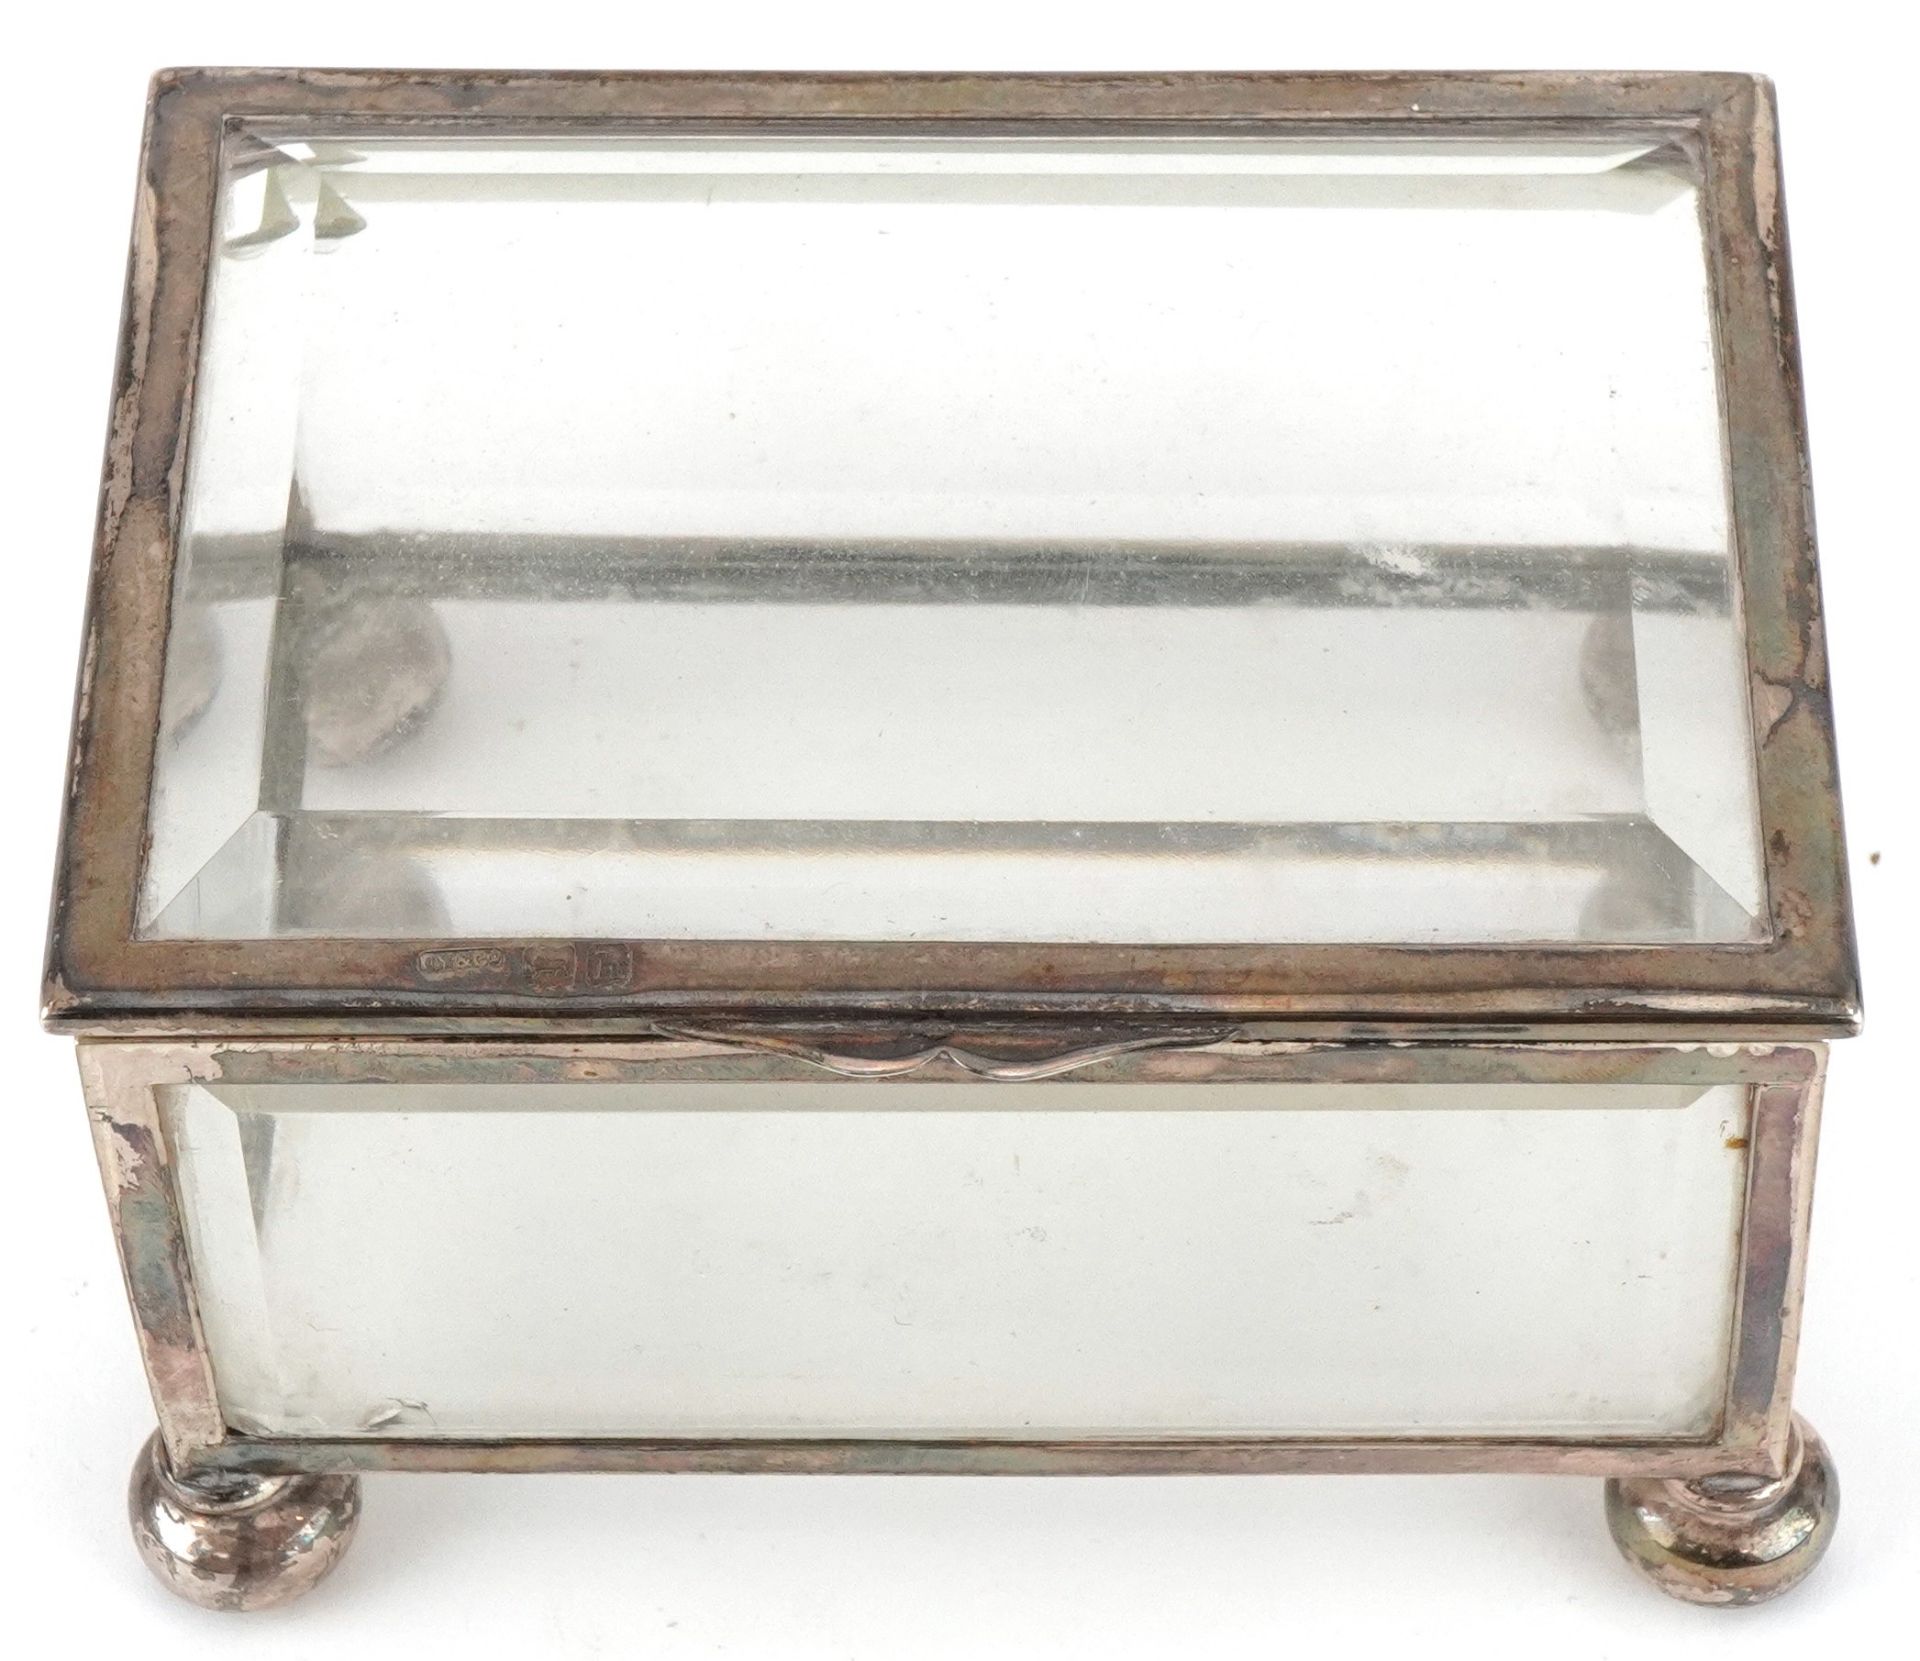 Grey & Co, Edwardian silver and bevelled glass jewel box raised on four bun feet, London 1903, 7cm H - Image 2 of 6